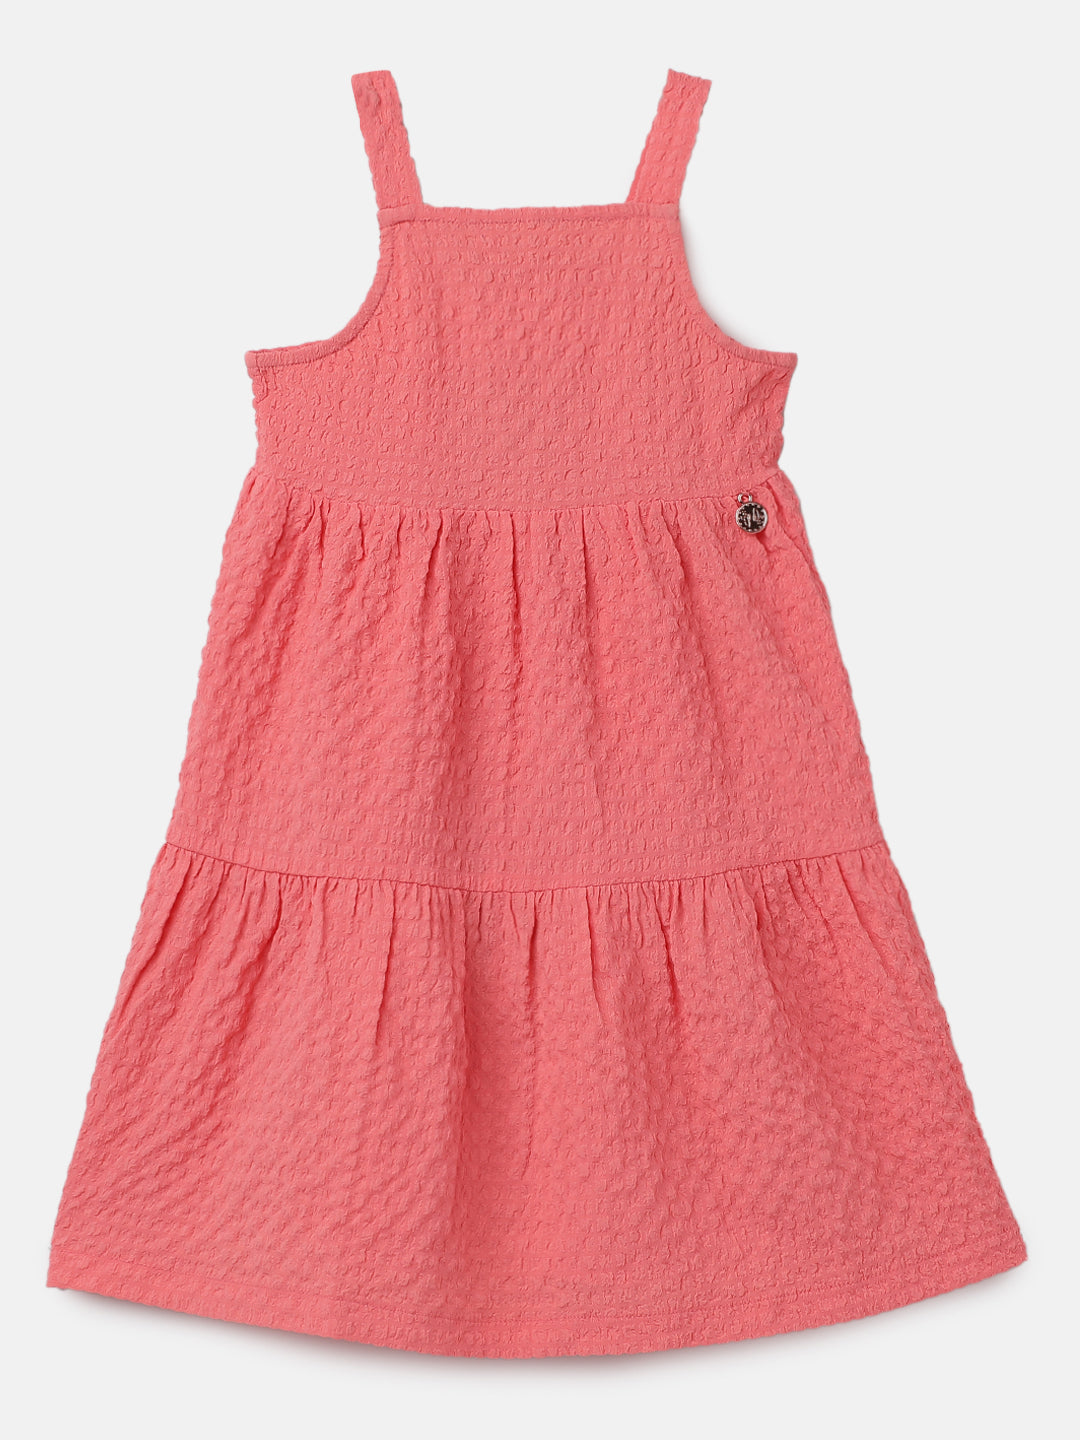 Girls Solid Red Crinkle Casual Dress